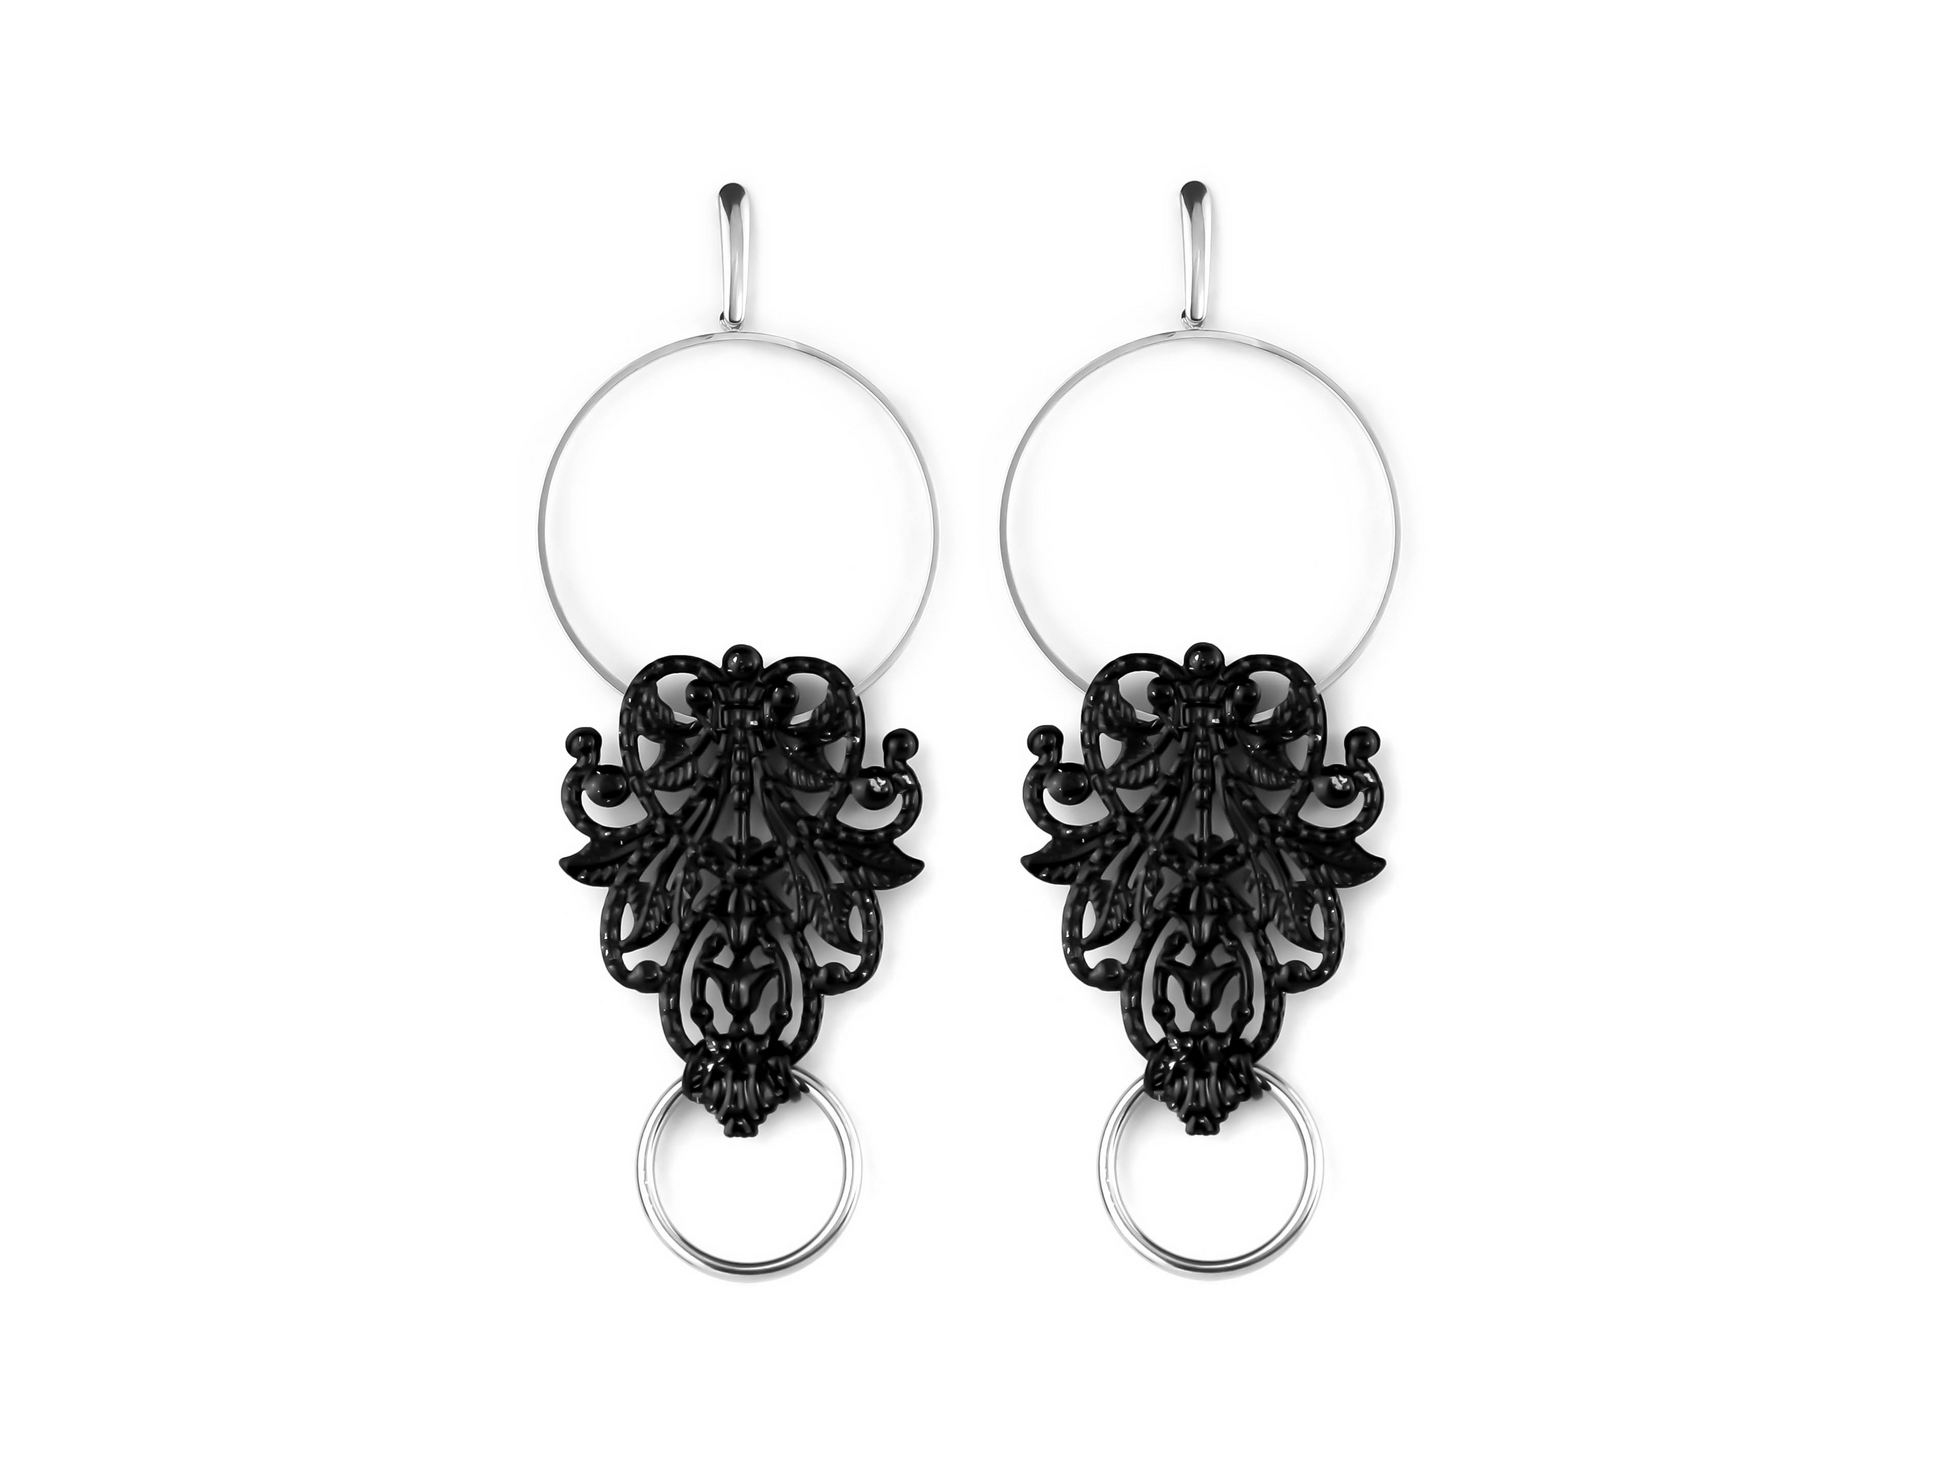 This image features a pair of black and silver filigree hoop earrings from Myril Jewels, perfect for those with a taste for dark, avant-garde accessories. The intricate filigree design on the earrings exudes gothic charm, making them suitable for a Halloween ensemble, everyday goth wear, or as an eye-catching addition to a festival outfit. They serve as a bold statement piece for anyone embracing a neo-gothic, witchcore, or whimsigoth aesthetic.